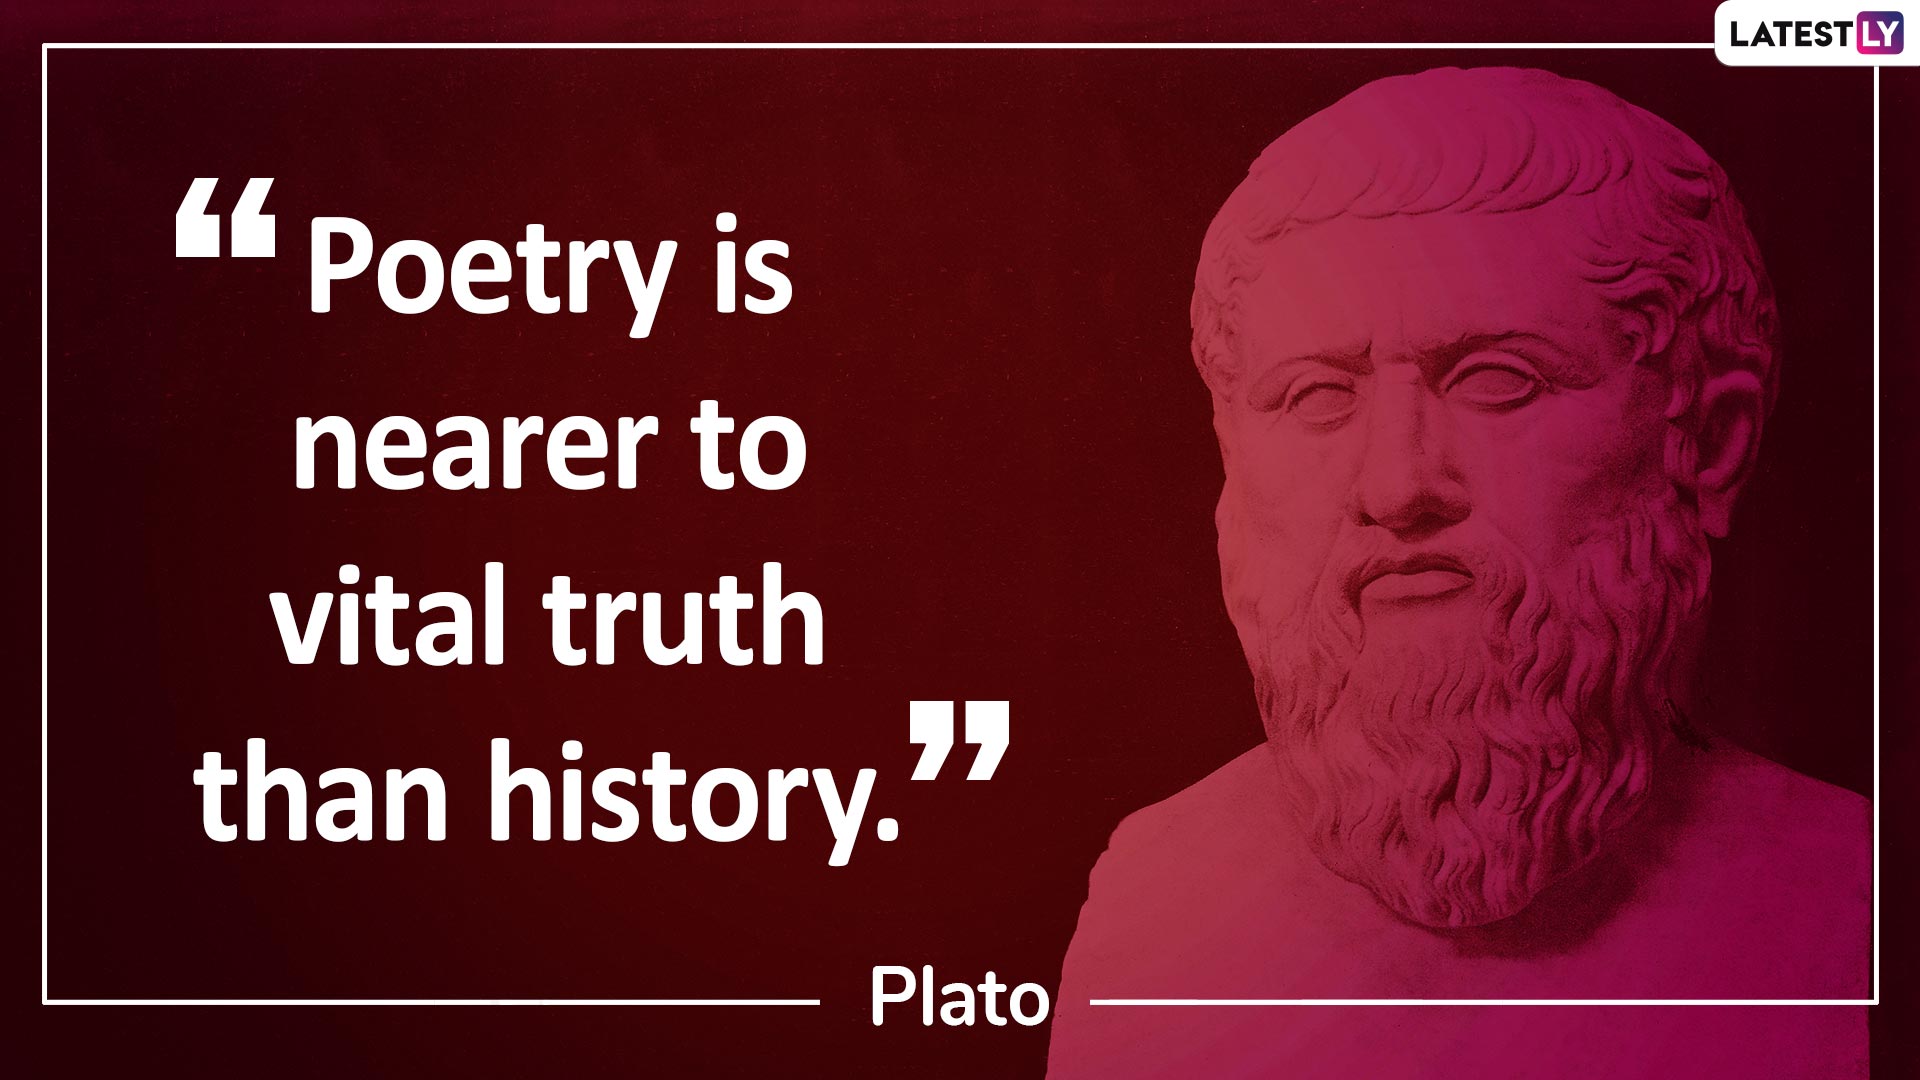 World Poetry Day 2020: Quotes and Lines by Famous Poets That Describe